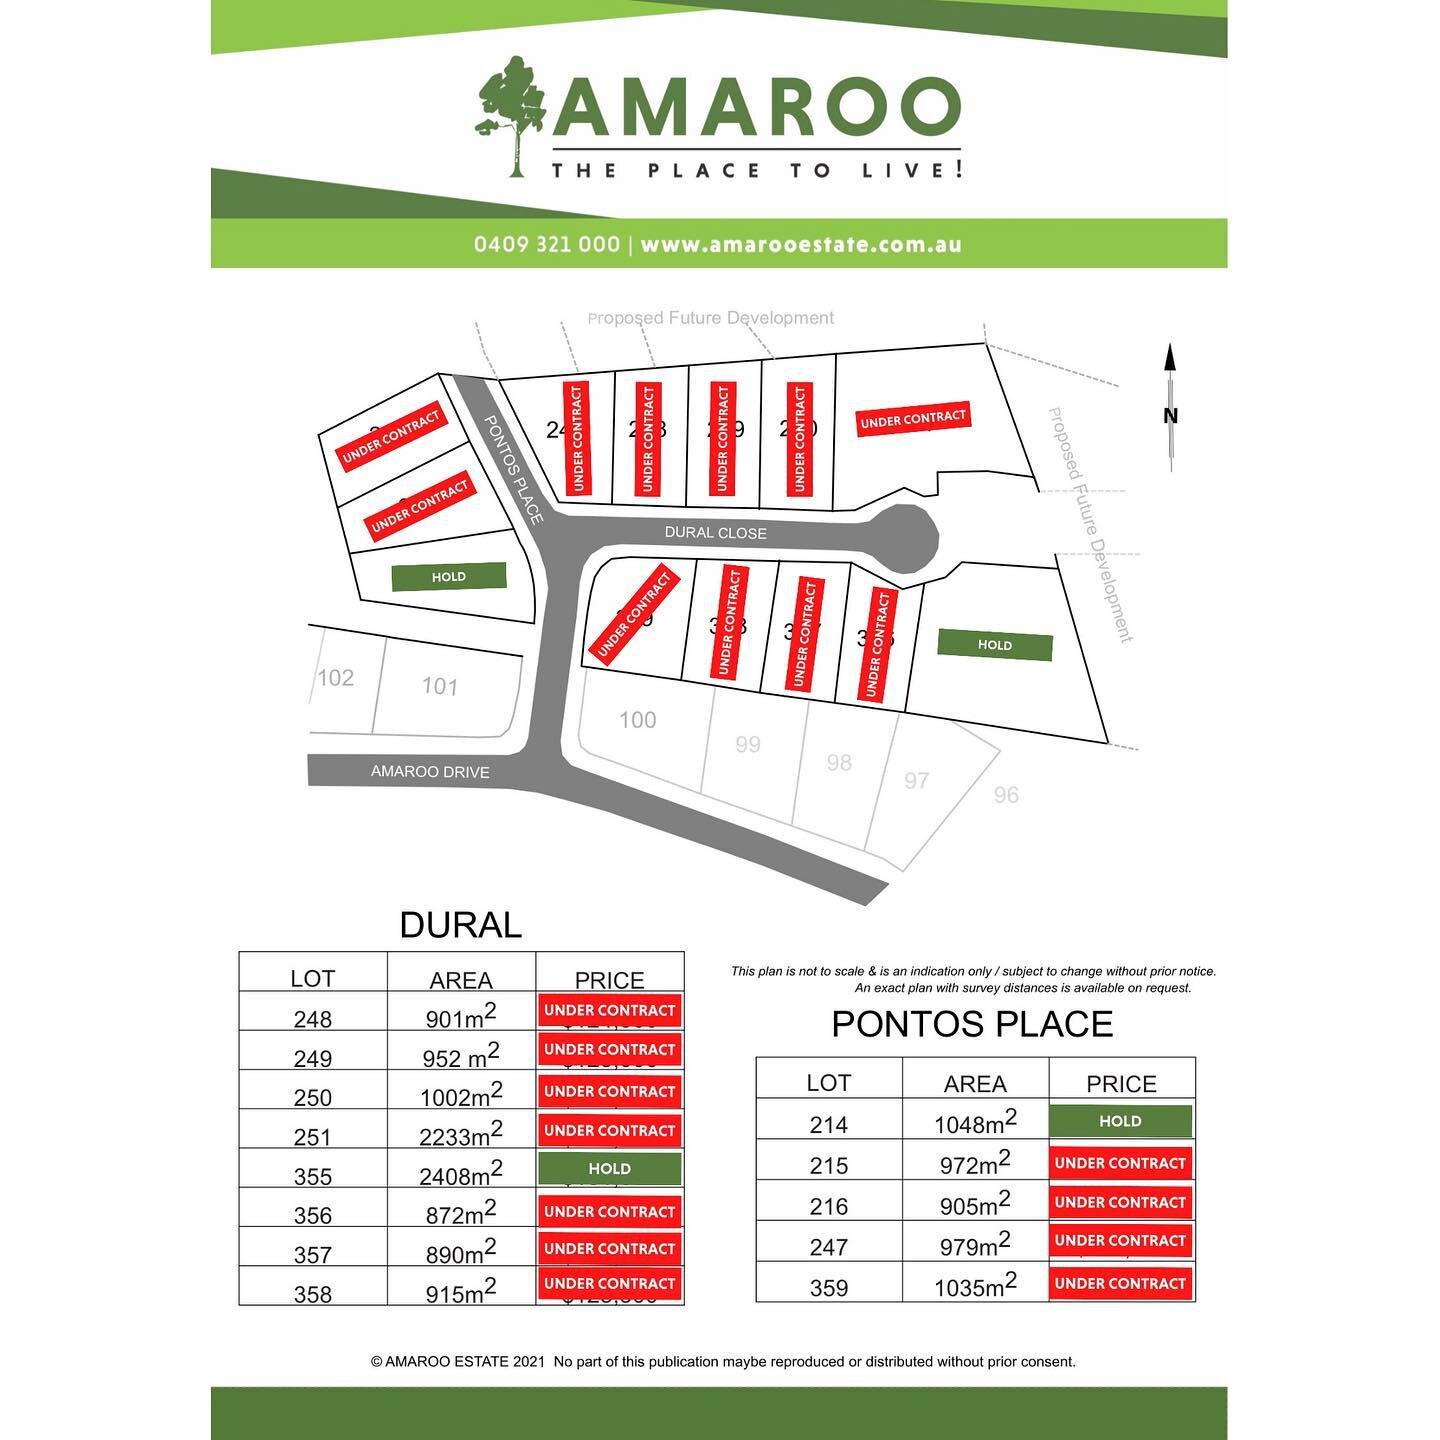 Happy Friday!😊
We have been incredibly busy behind the scenes at Amaroo Estate! 
It&rsquo;s an exciting time of year when contracts are being signed! 🎉

We can&rsquo;t wait to welcome all the new owners into our Amaroo Family! 🌤